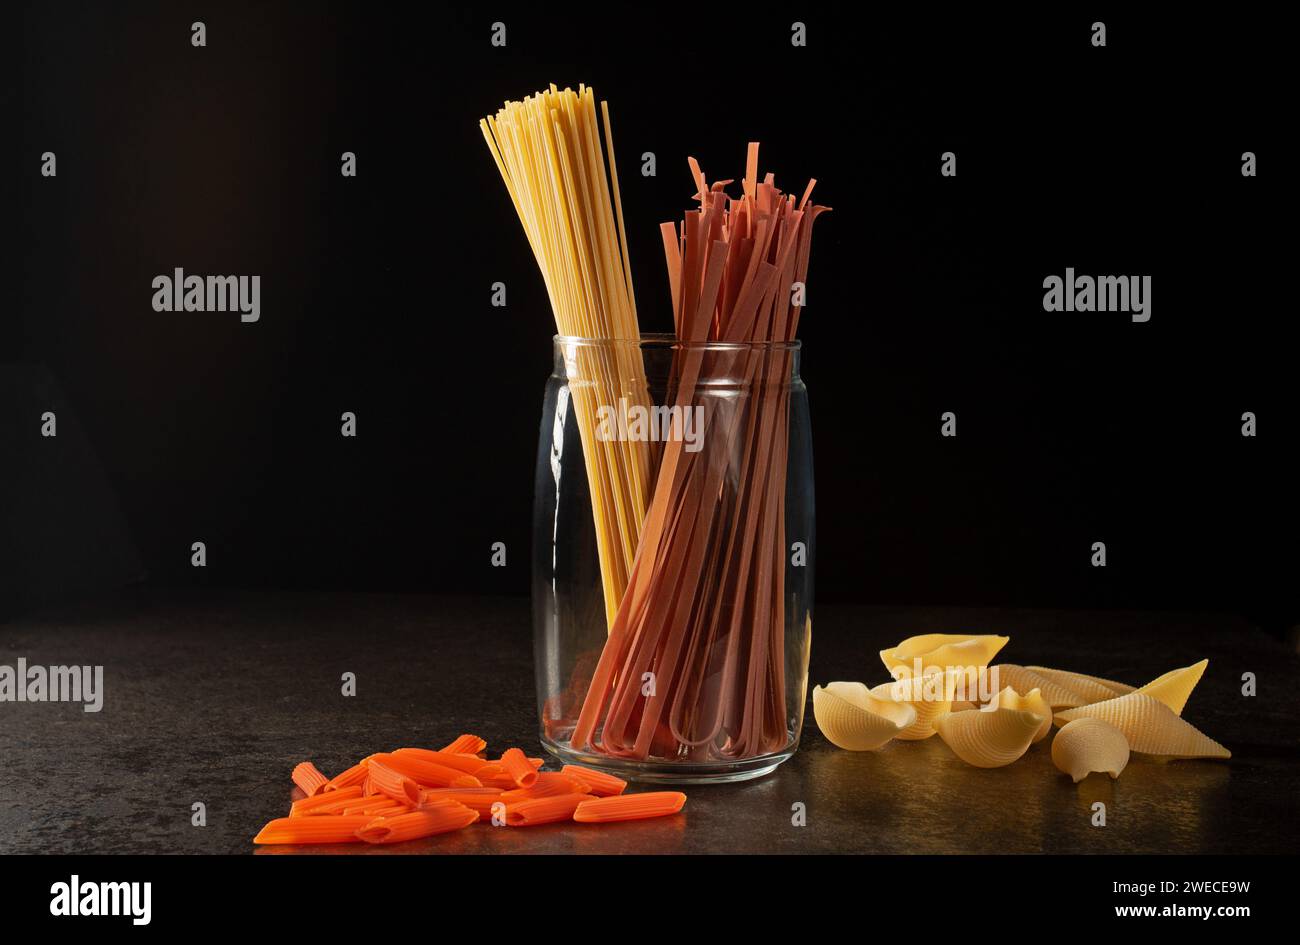 This vibrant image showcases a captivating still life arrangement of different types of italian pastas, well-lit and expertly captured against a dark Stock Photo